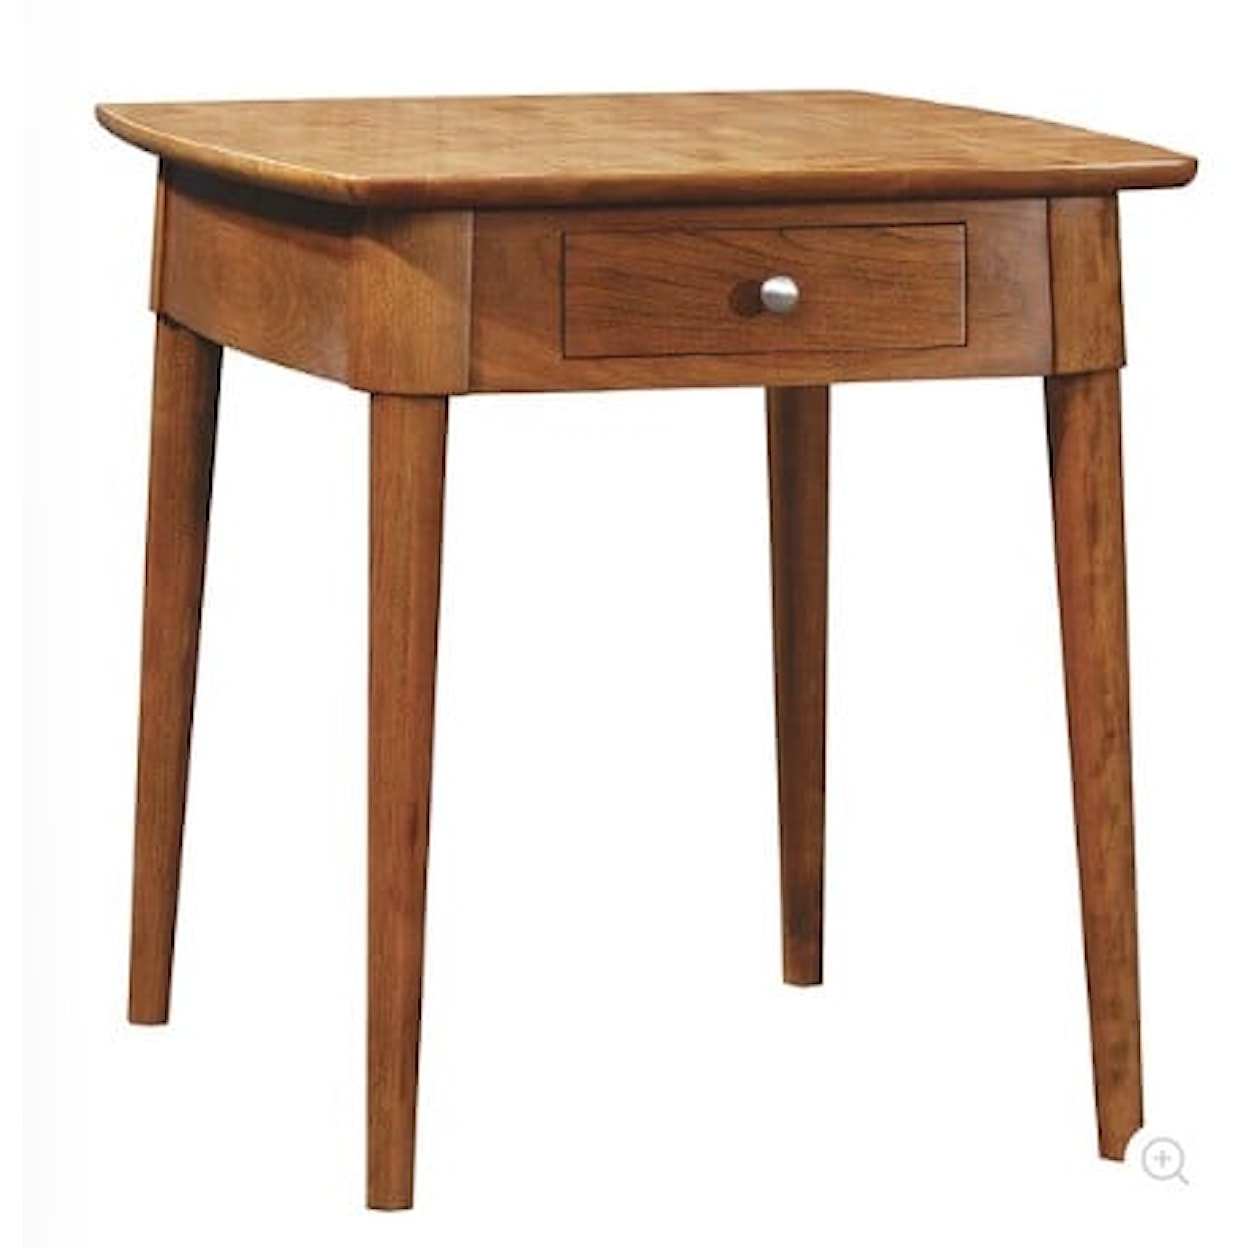 Stickley Nichols and Stone Collection CANTERBURY END TABLE